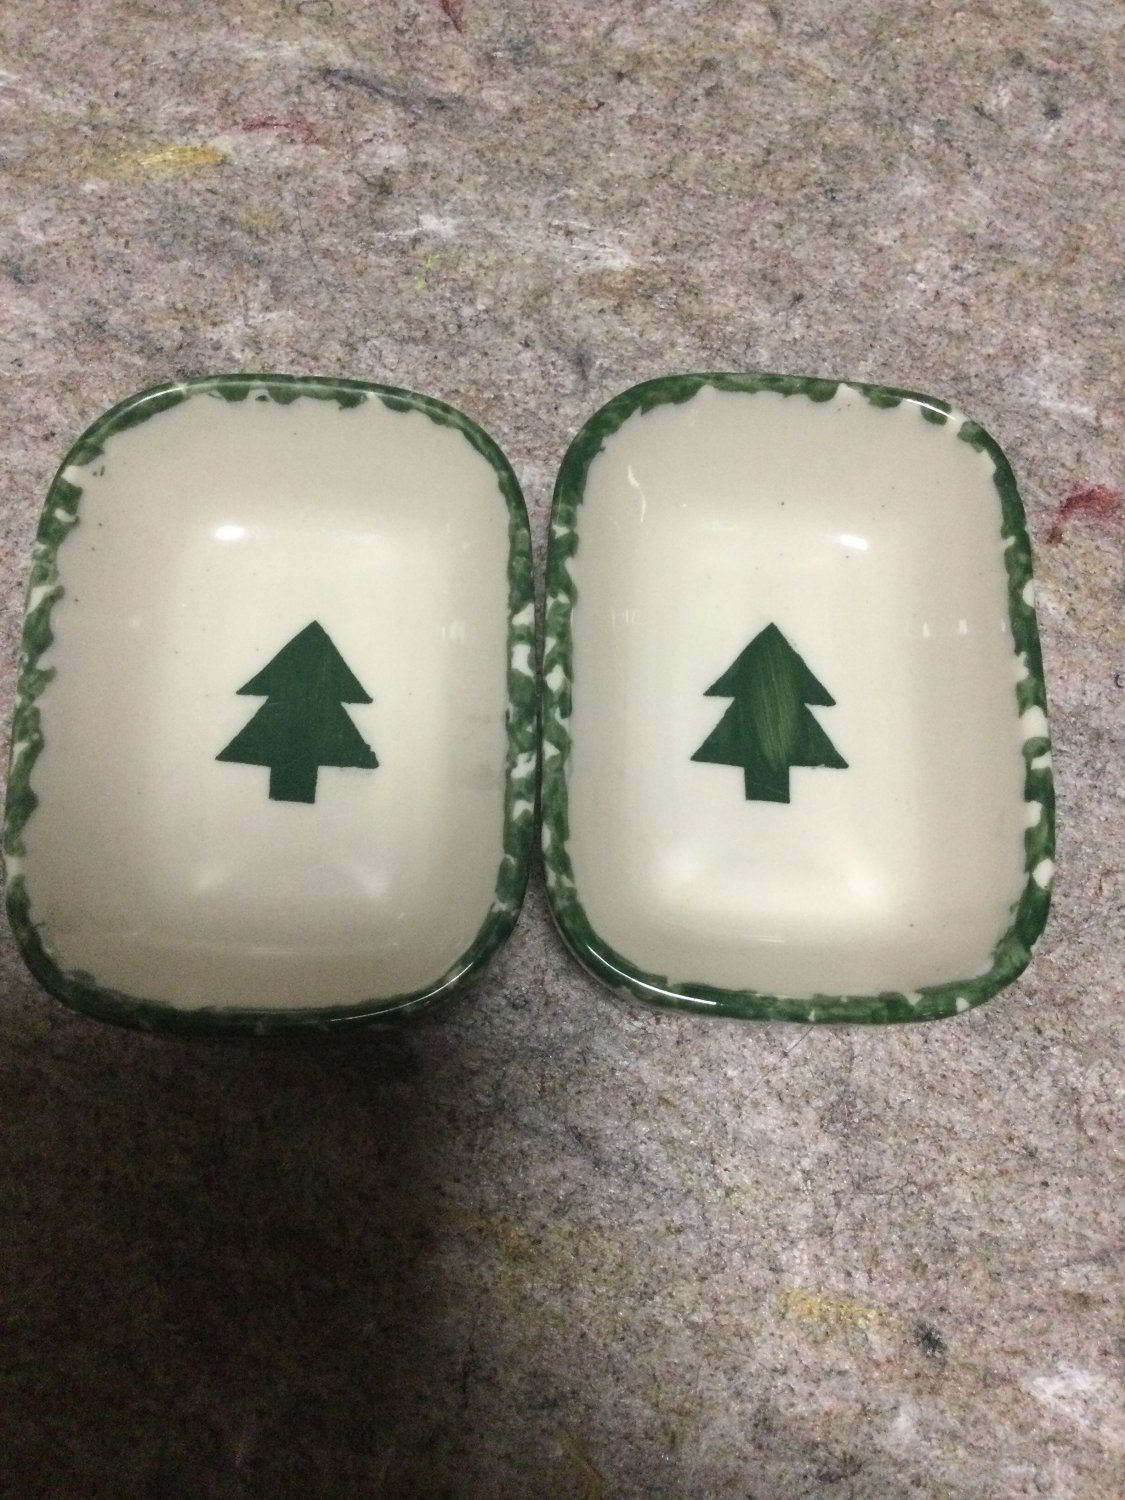 Henn Workshops green sponged treat (relish) dish with cream center with tree set of 2